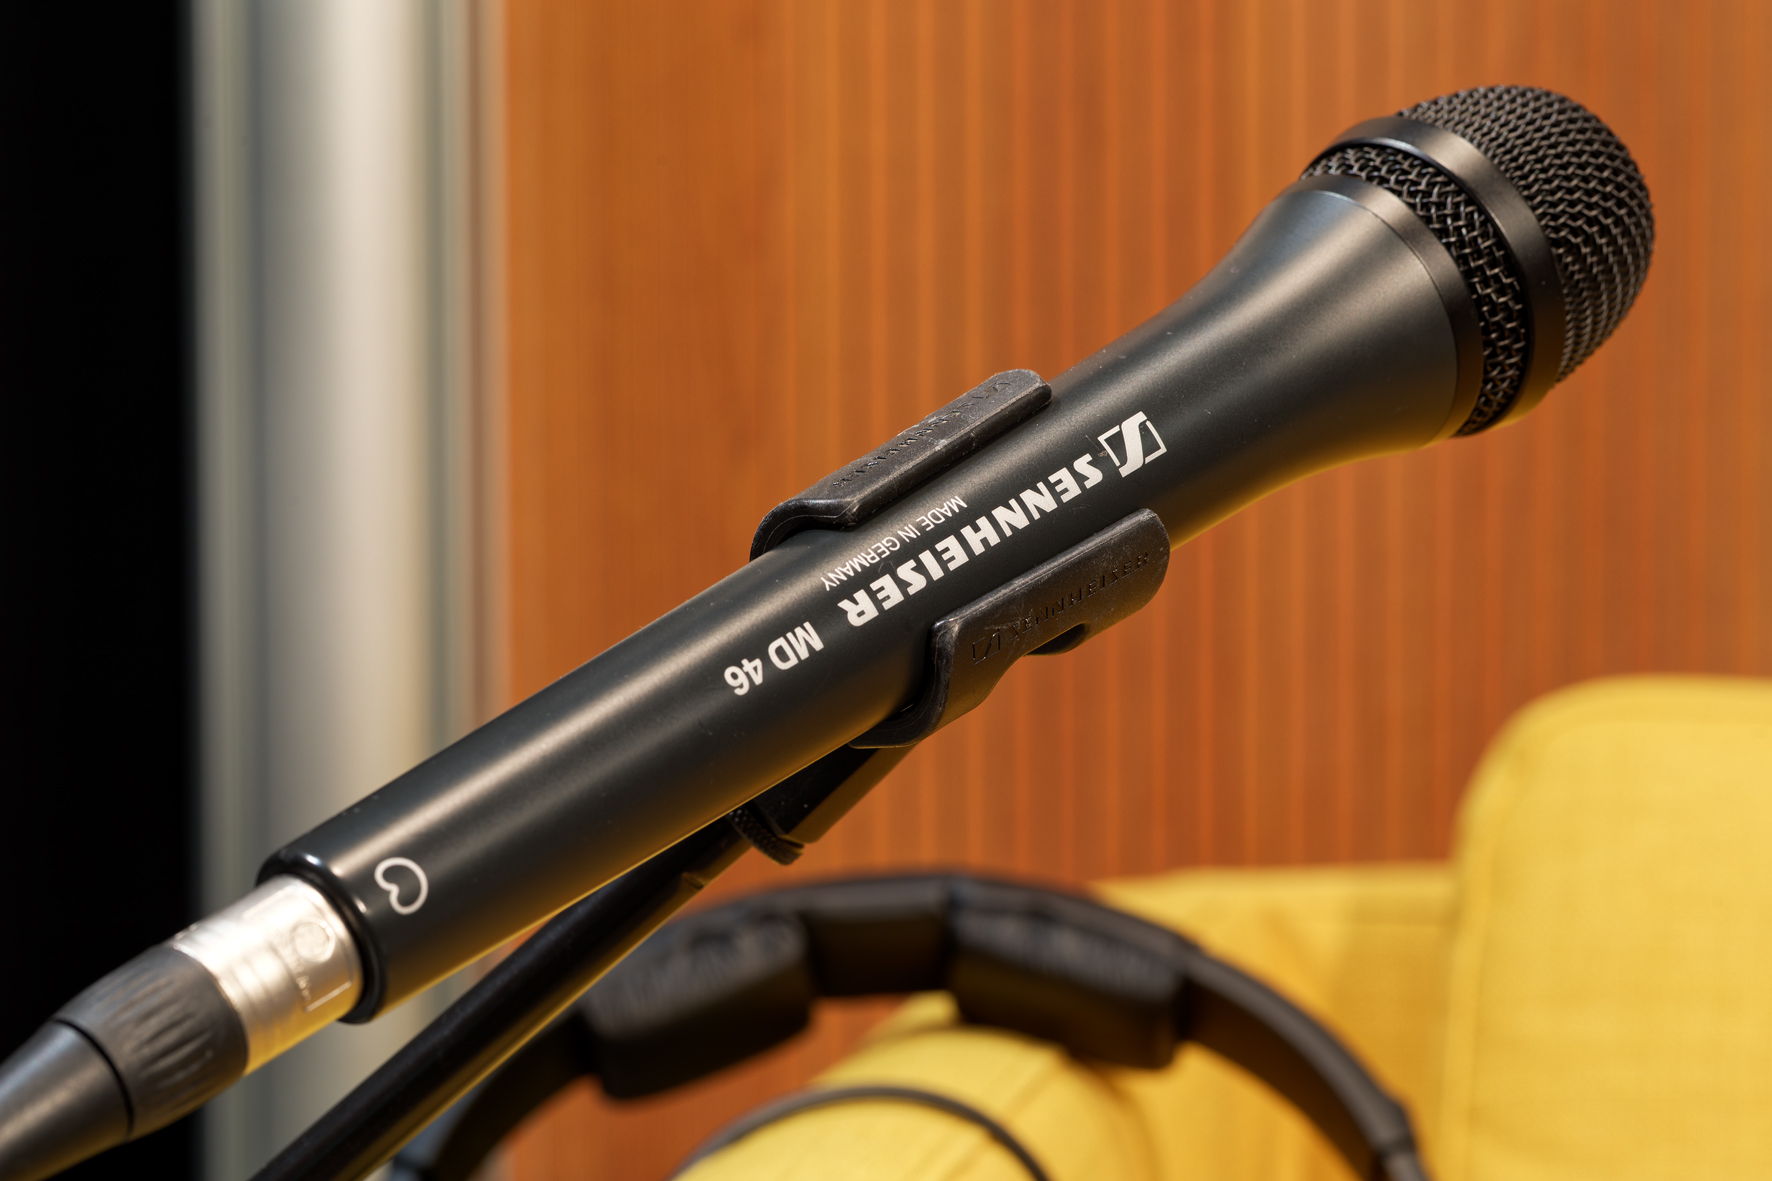 For the podcasts, the speakers’ voices are recorded using dynamic Sennheiser MD 46 microphones